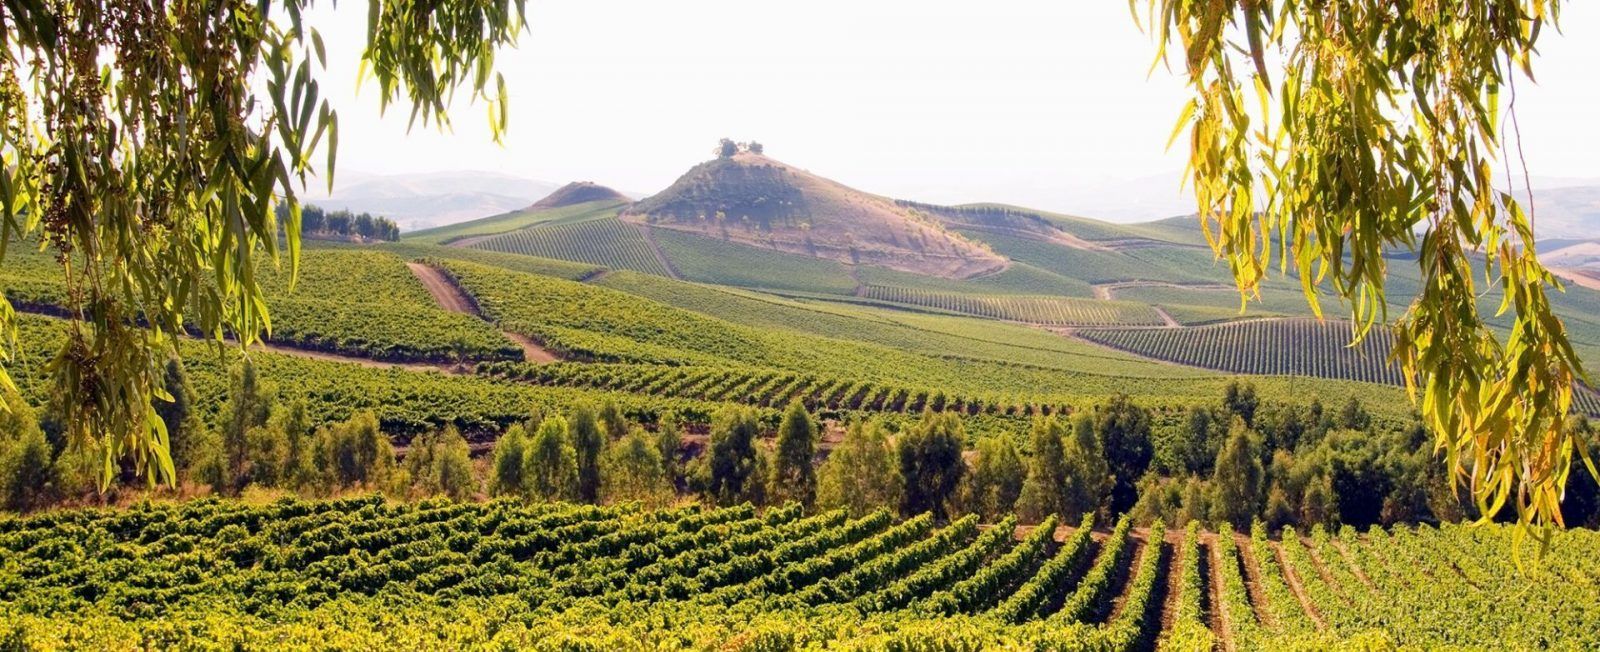 Italy’s lesser-known wine regions that need to be on your radar